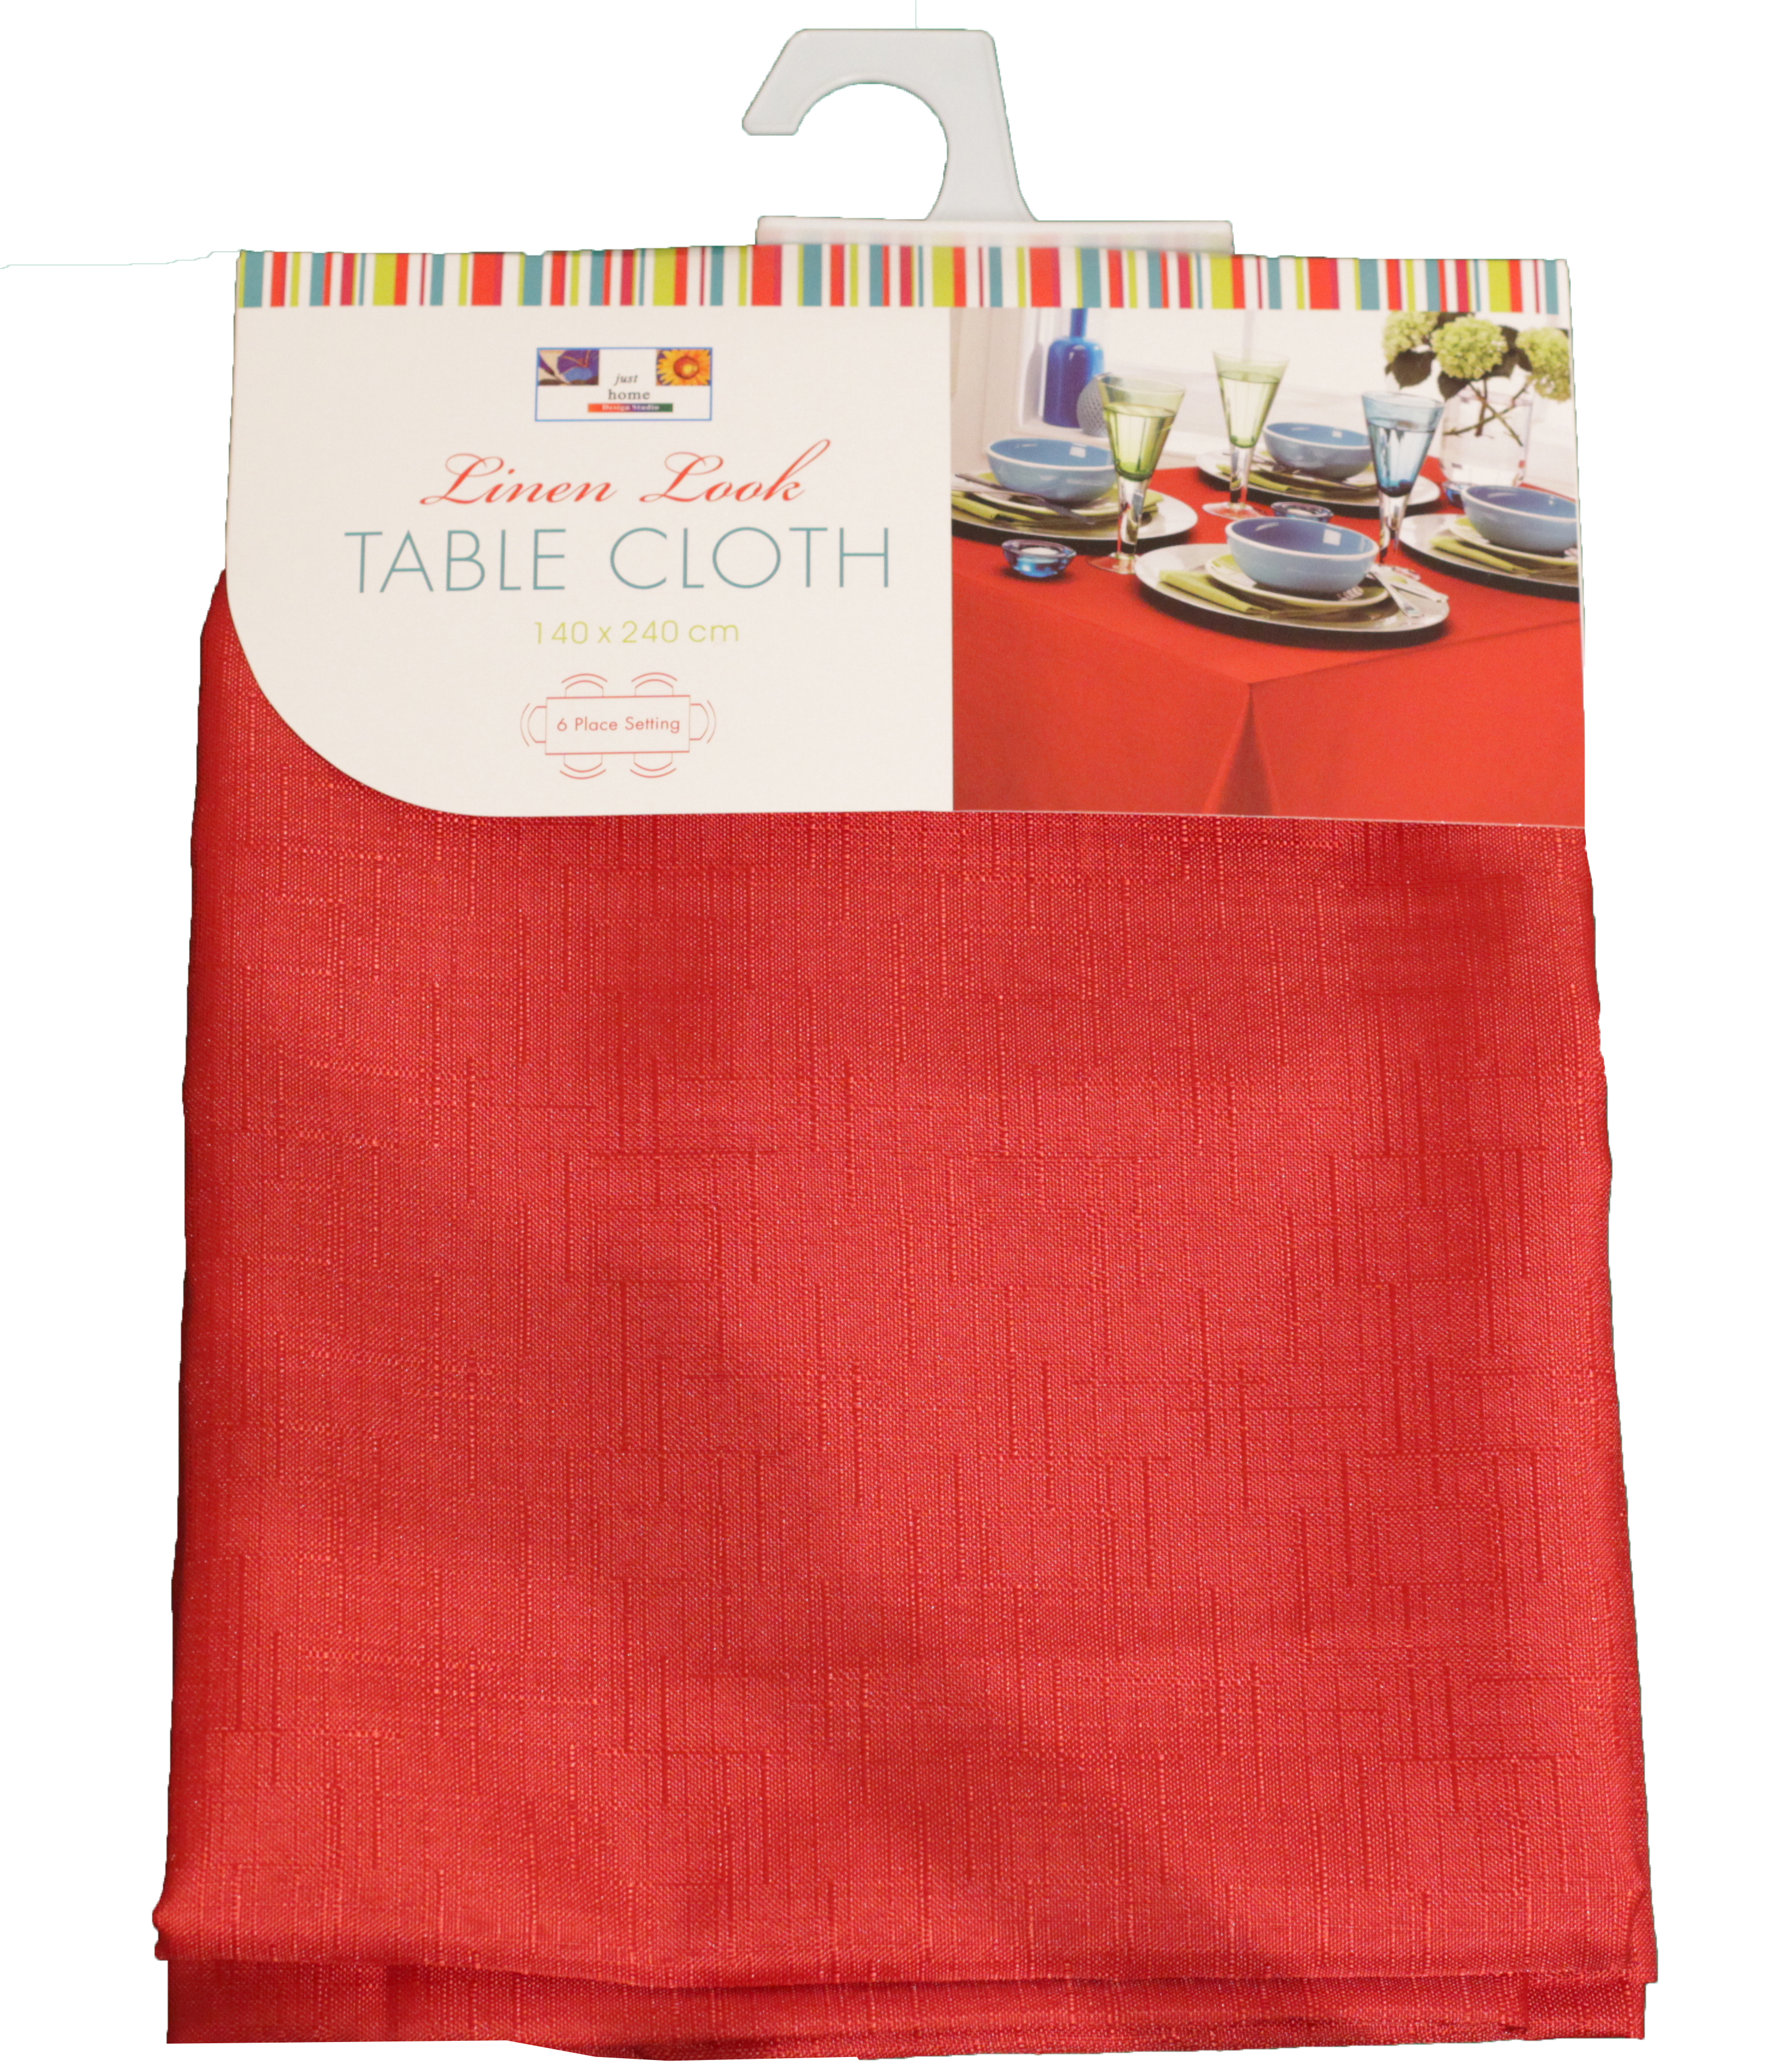 LINEN LOOK TABLECLOTH ROUND 180CM 4 ASSORTED COLORS